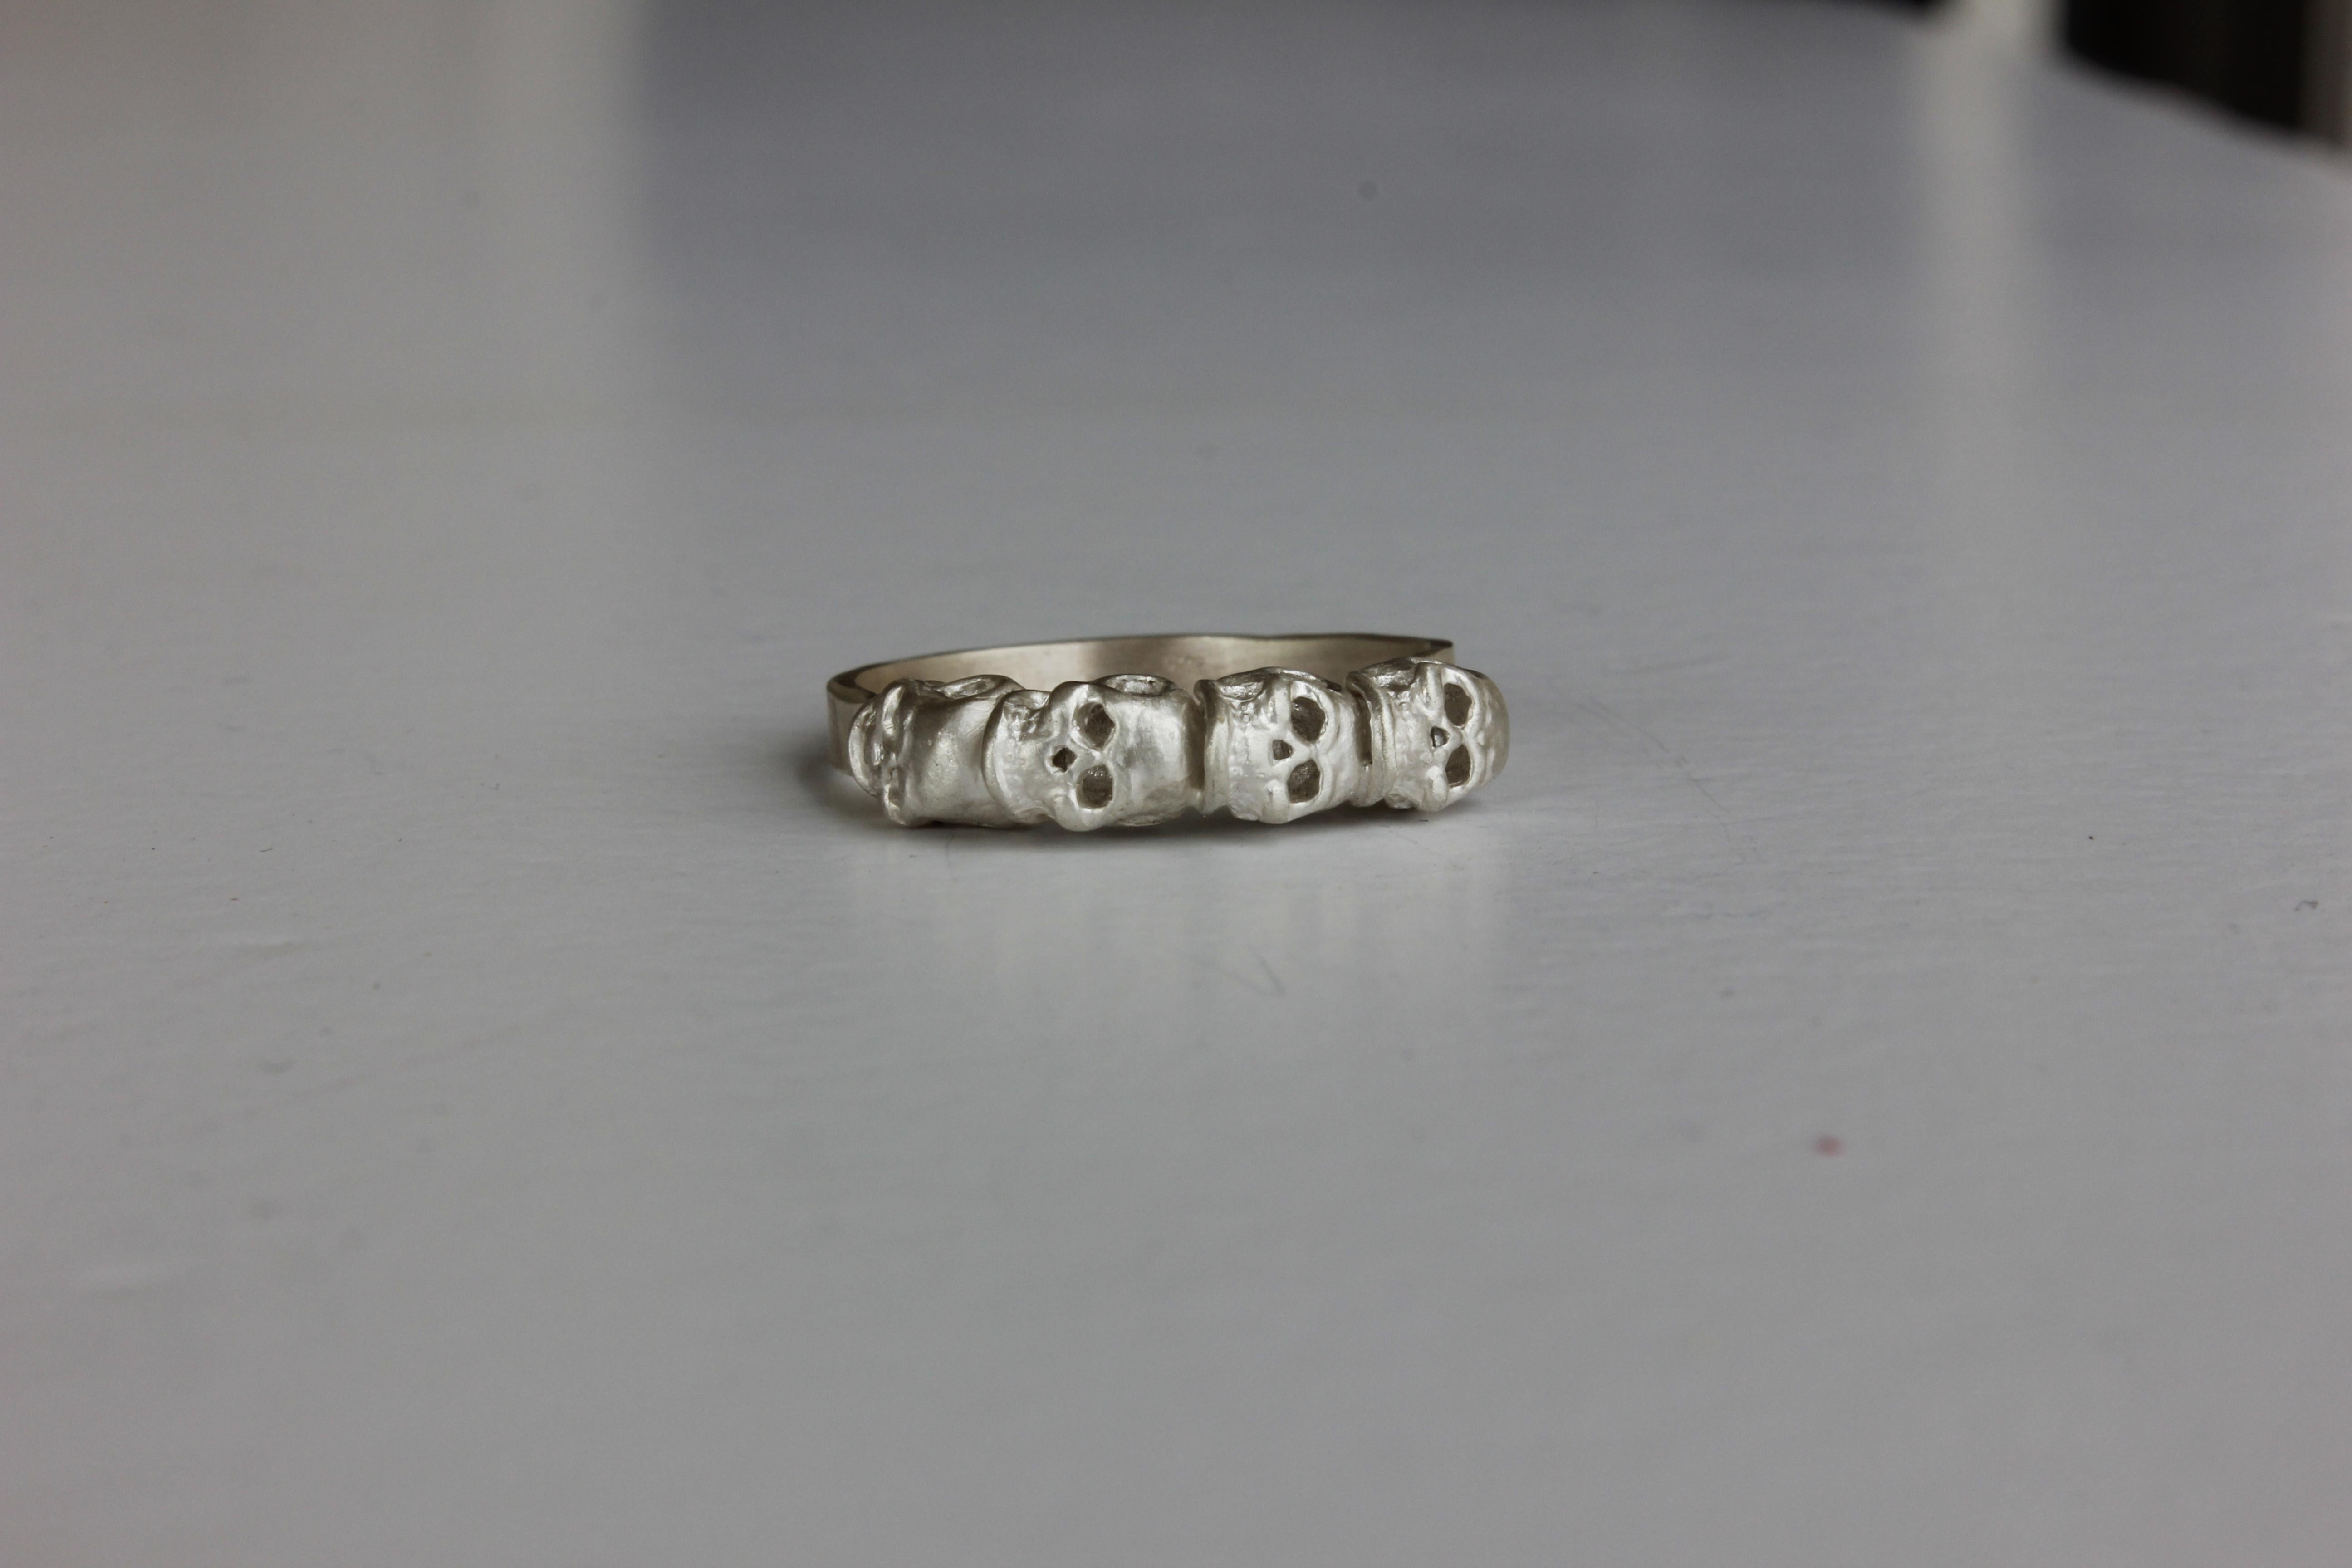 A contemporary silver skull ring featuring a row of four skulls.

This unique, unusual yet beautiful ring can add an elegant detail to your outfit.

